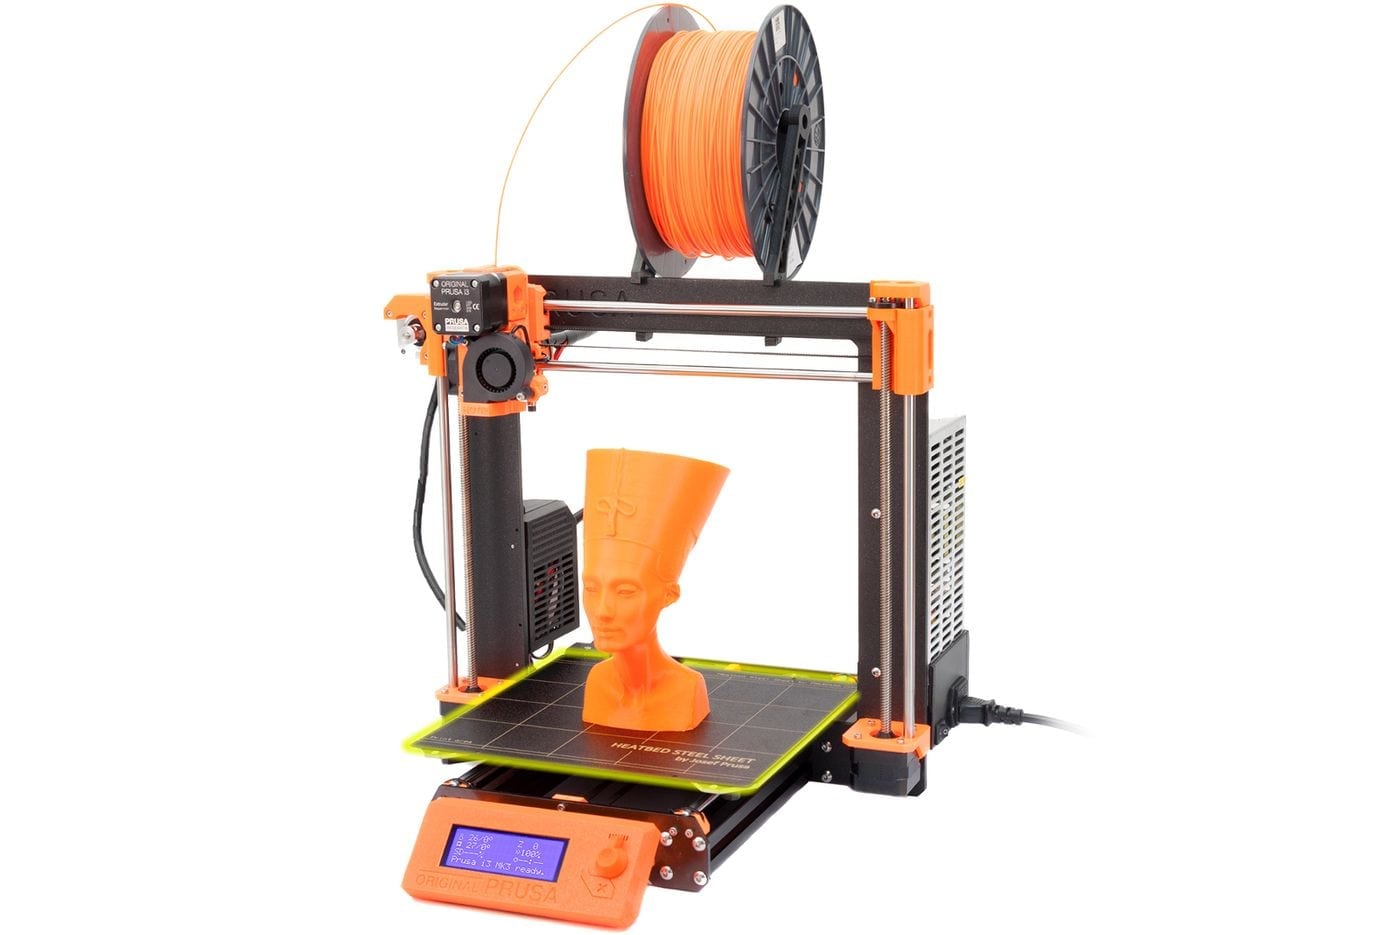 How Your Business Can Benefit From A 3D Printer